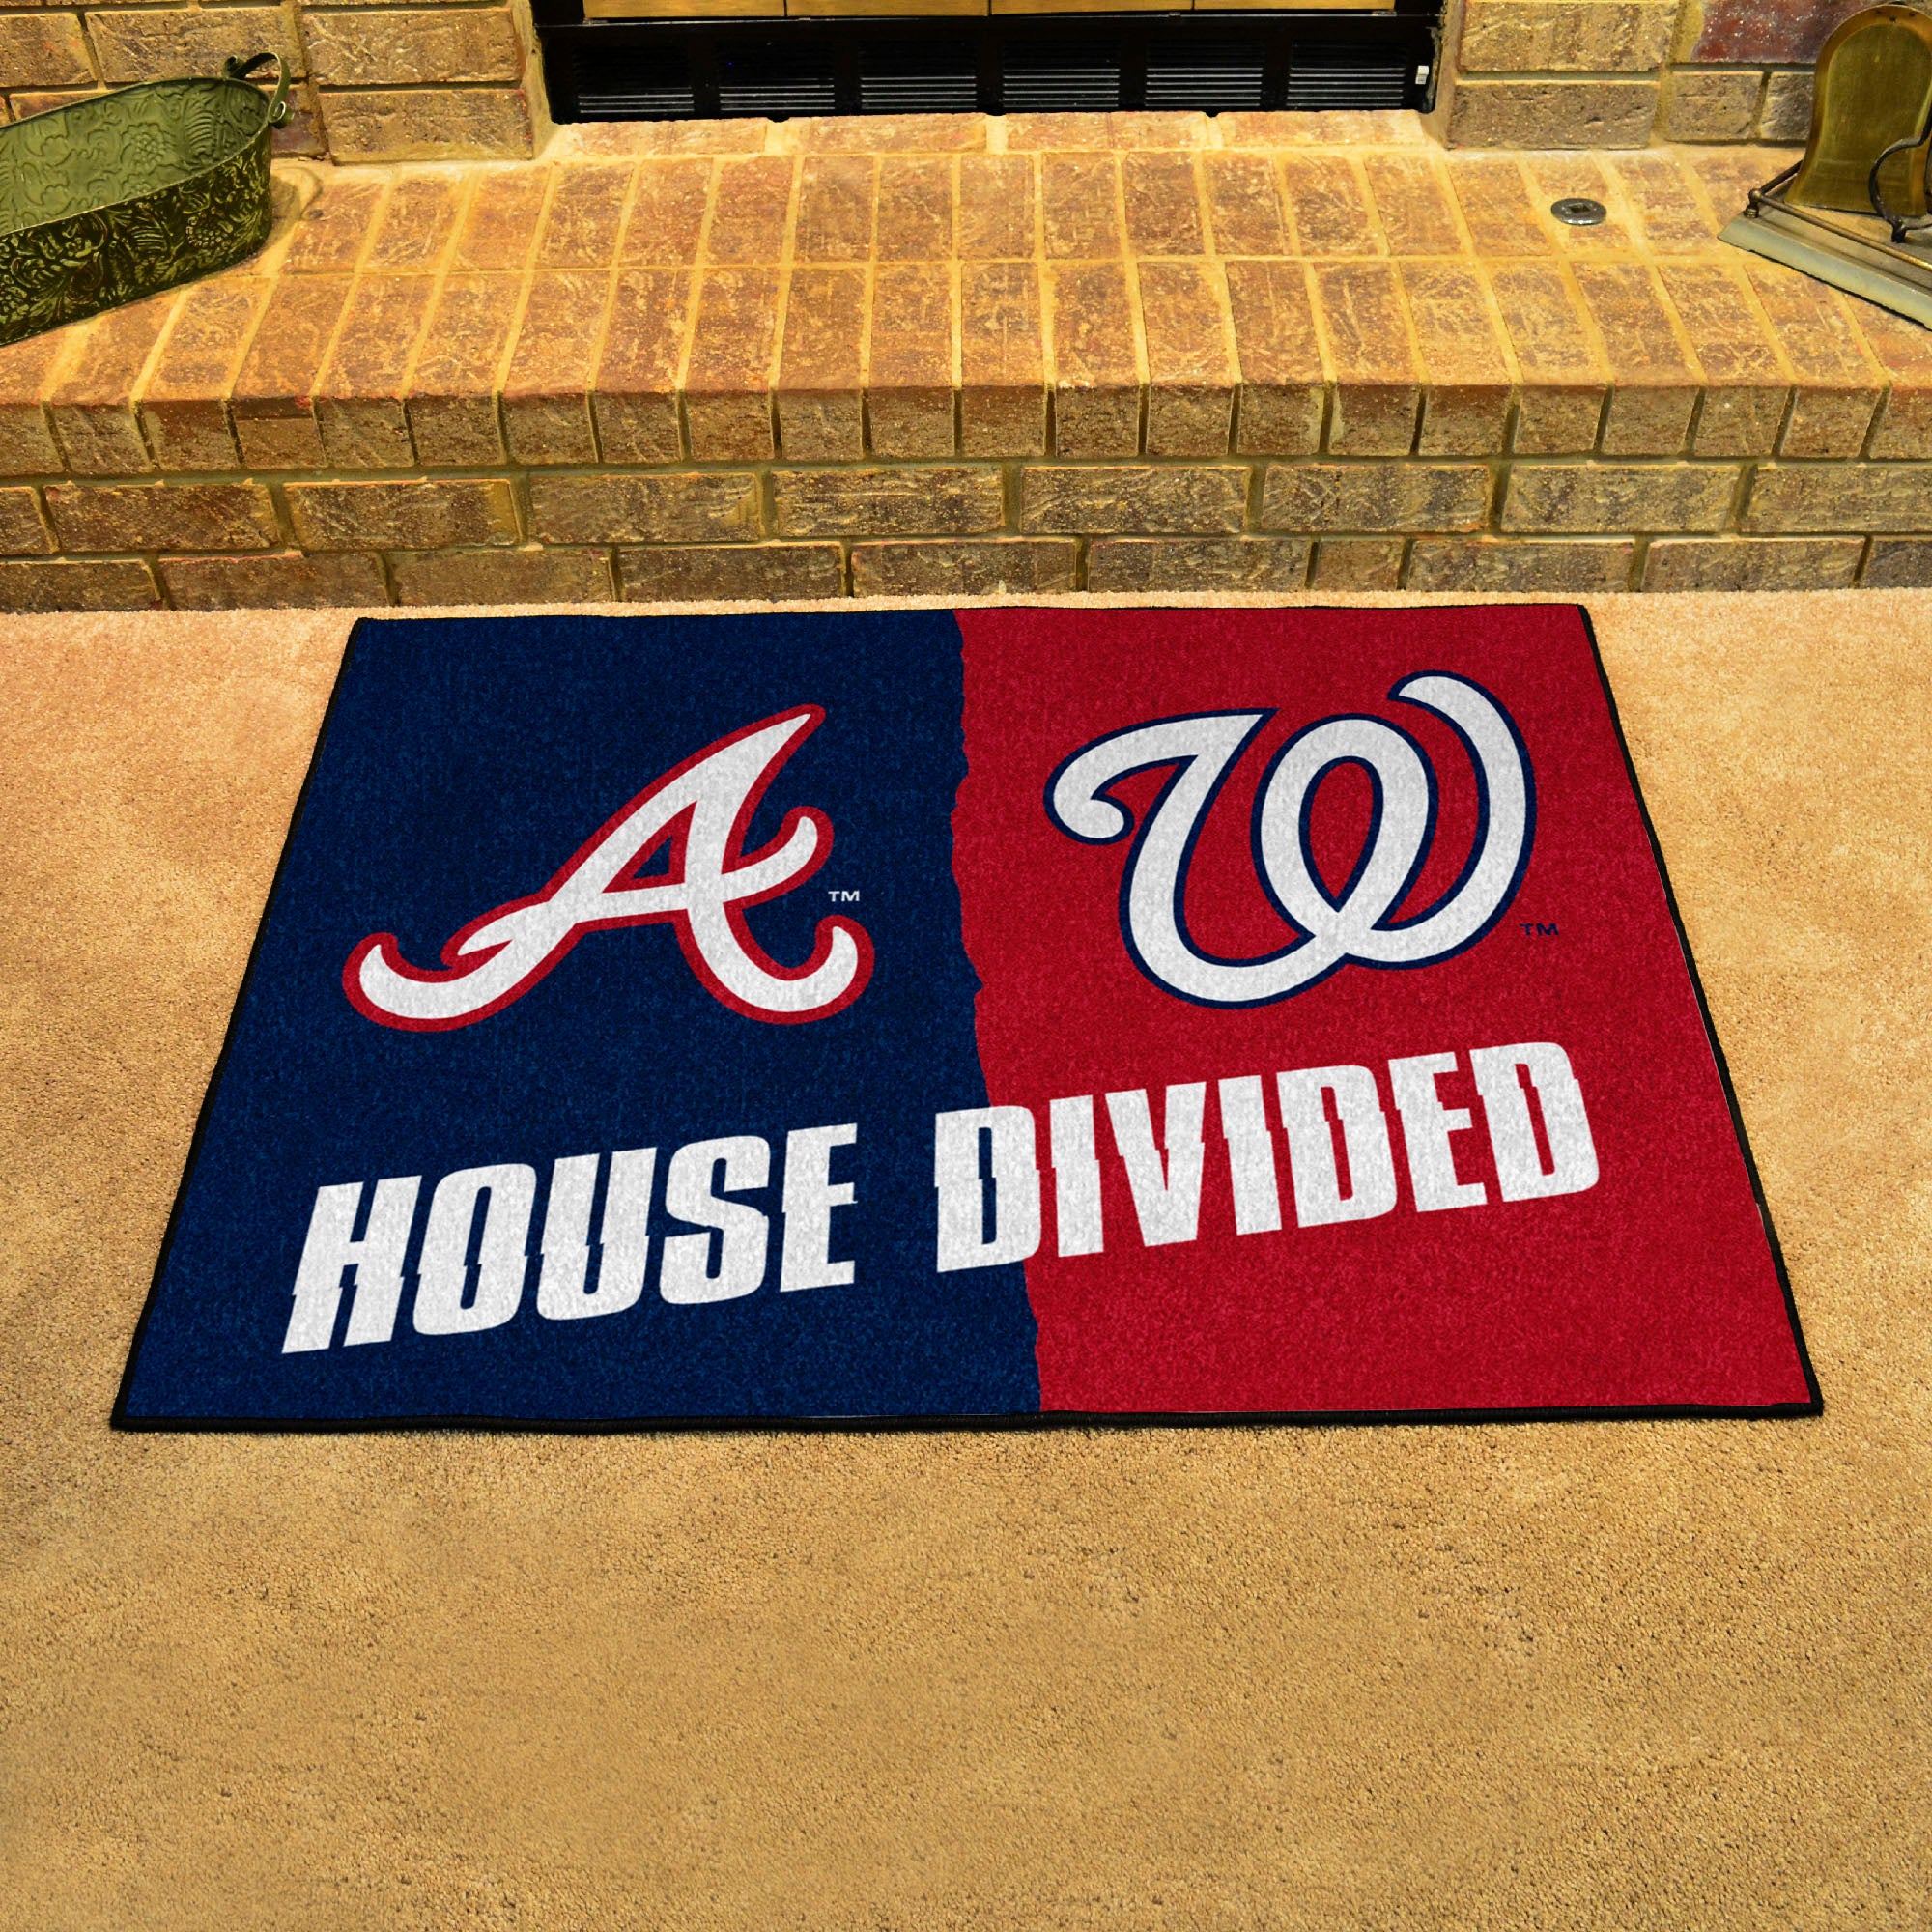 FANMATS, MLB House Divided - Braves / Nationals House Divided Rug